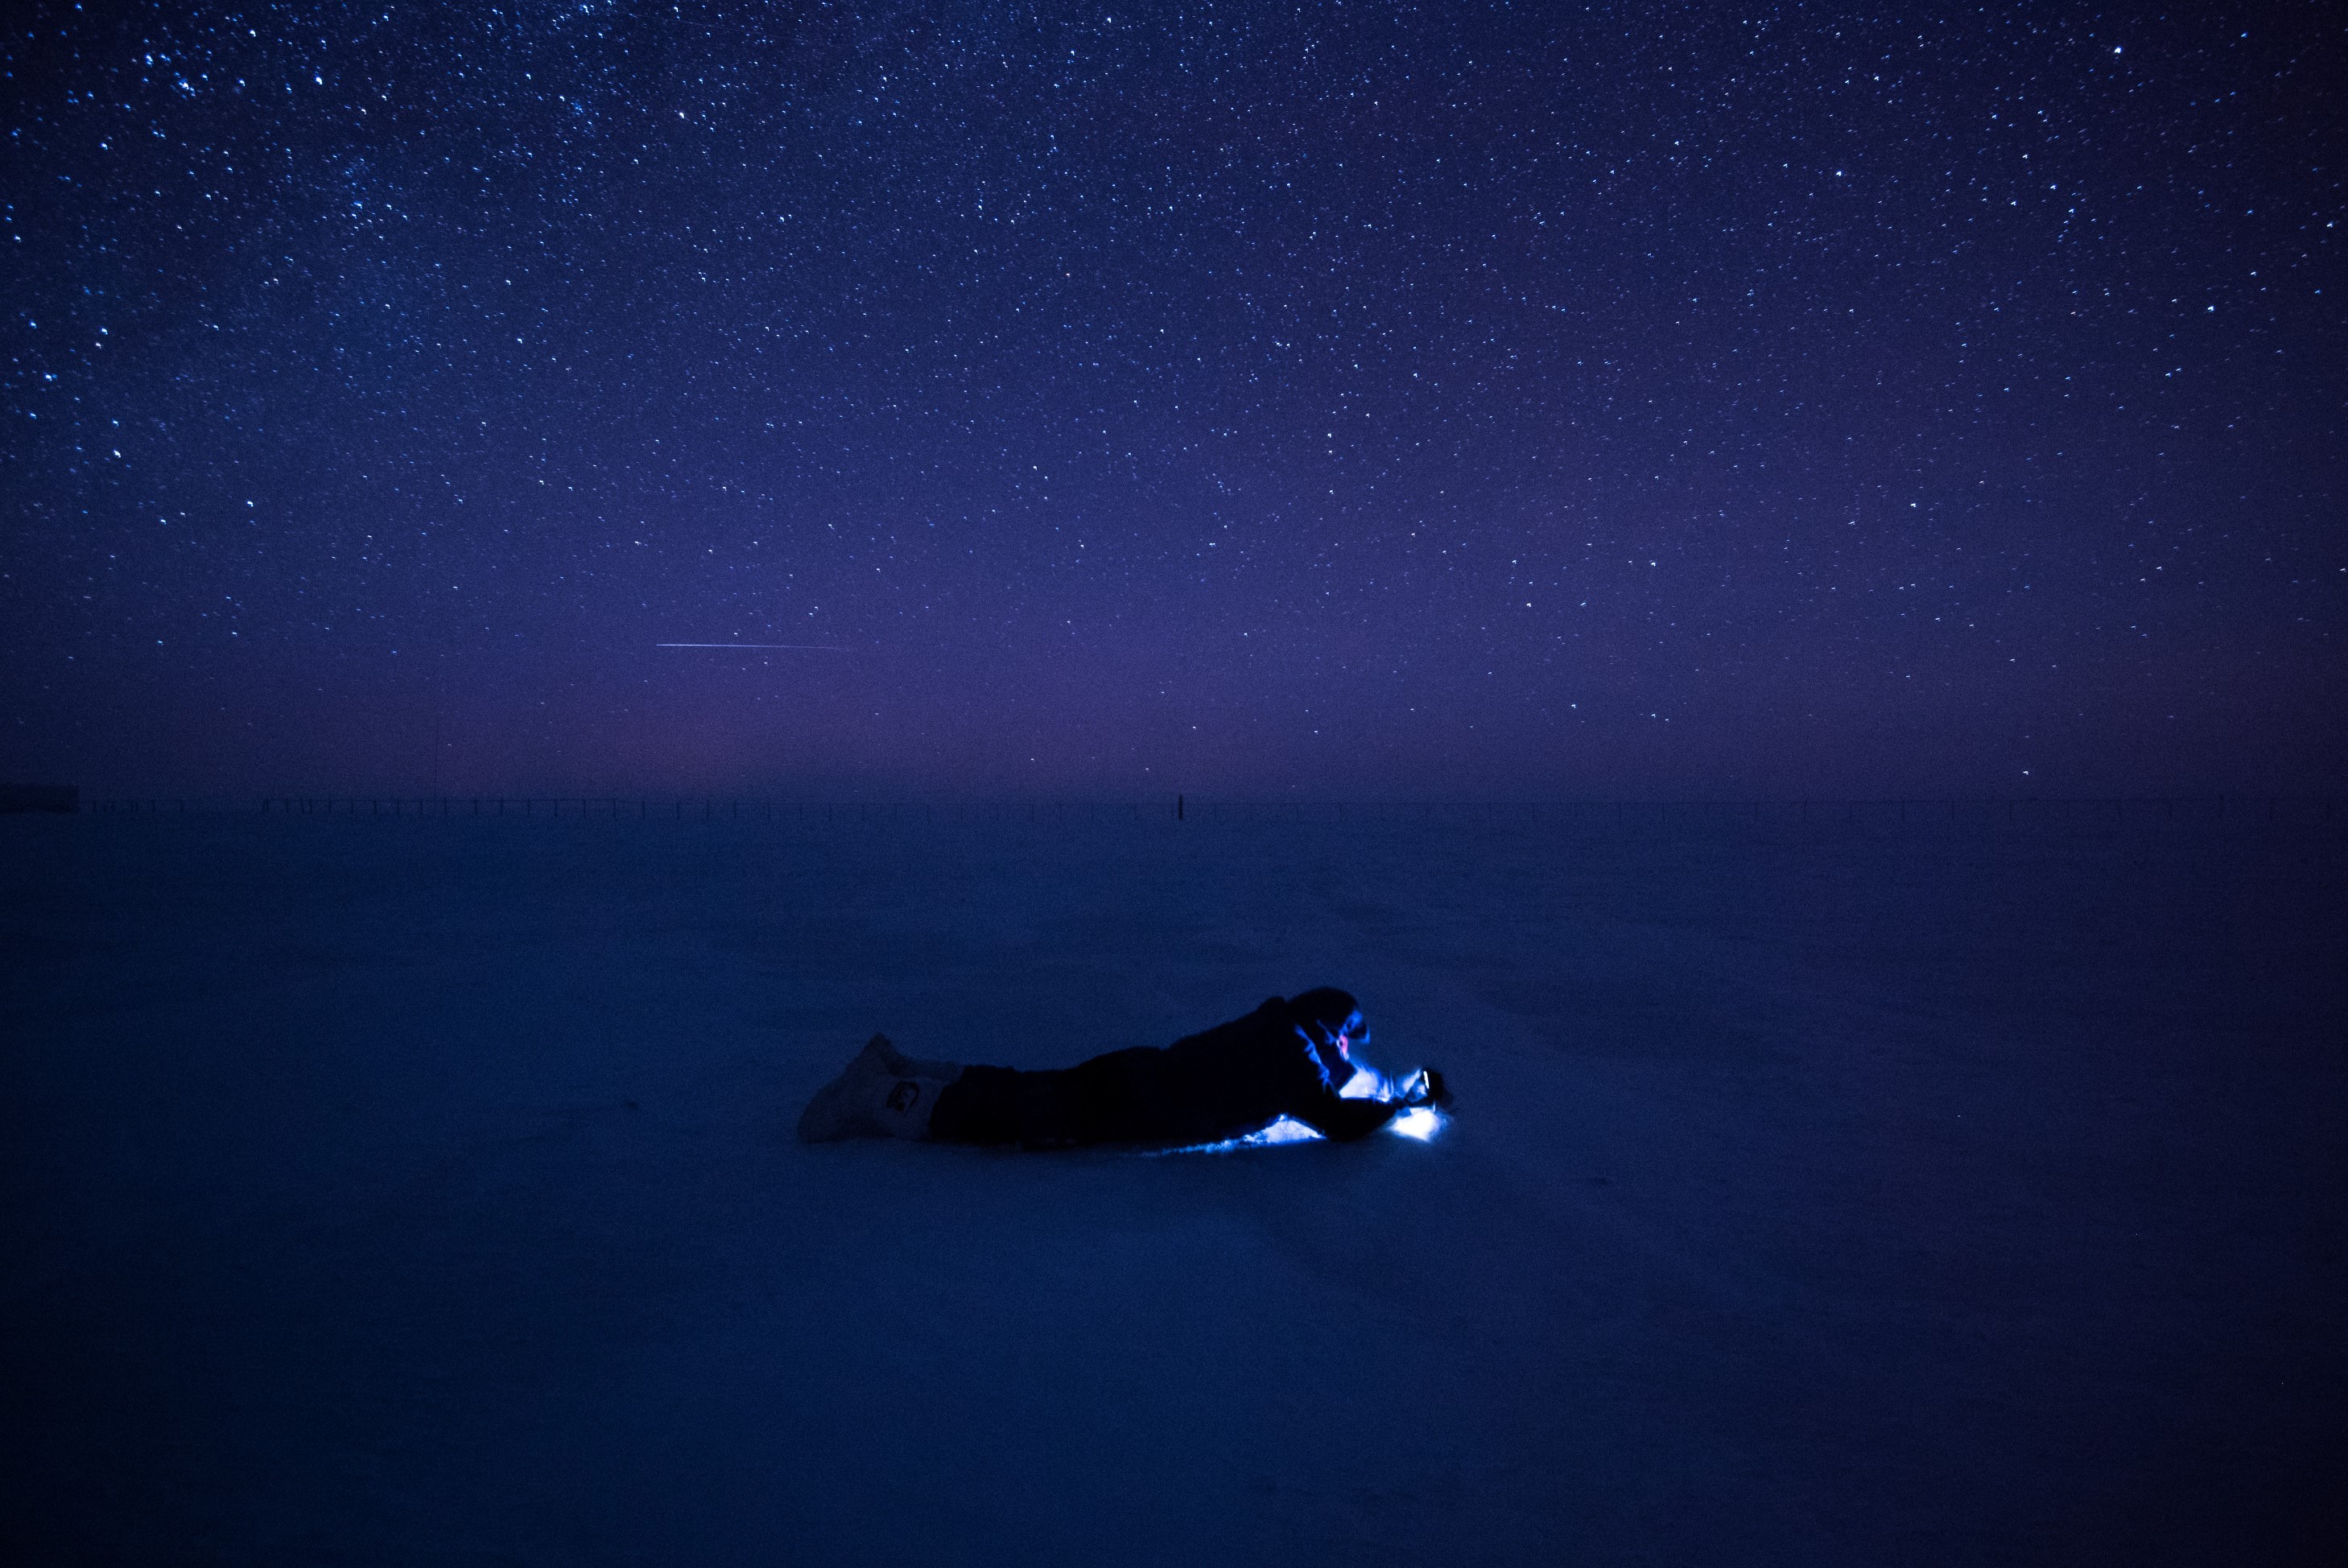 People 2917x1948 nature landscape Concordia Research Station Antarctica snow ice evening men Torchlight lying on front stars long exposure horizon isolation blue low light